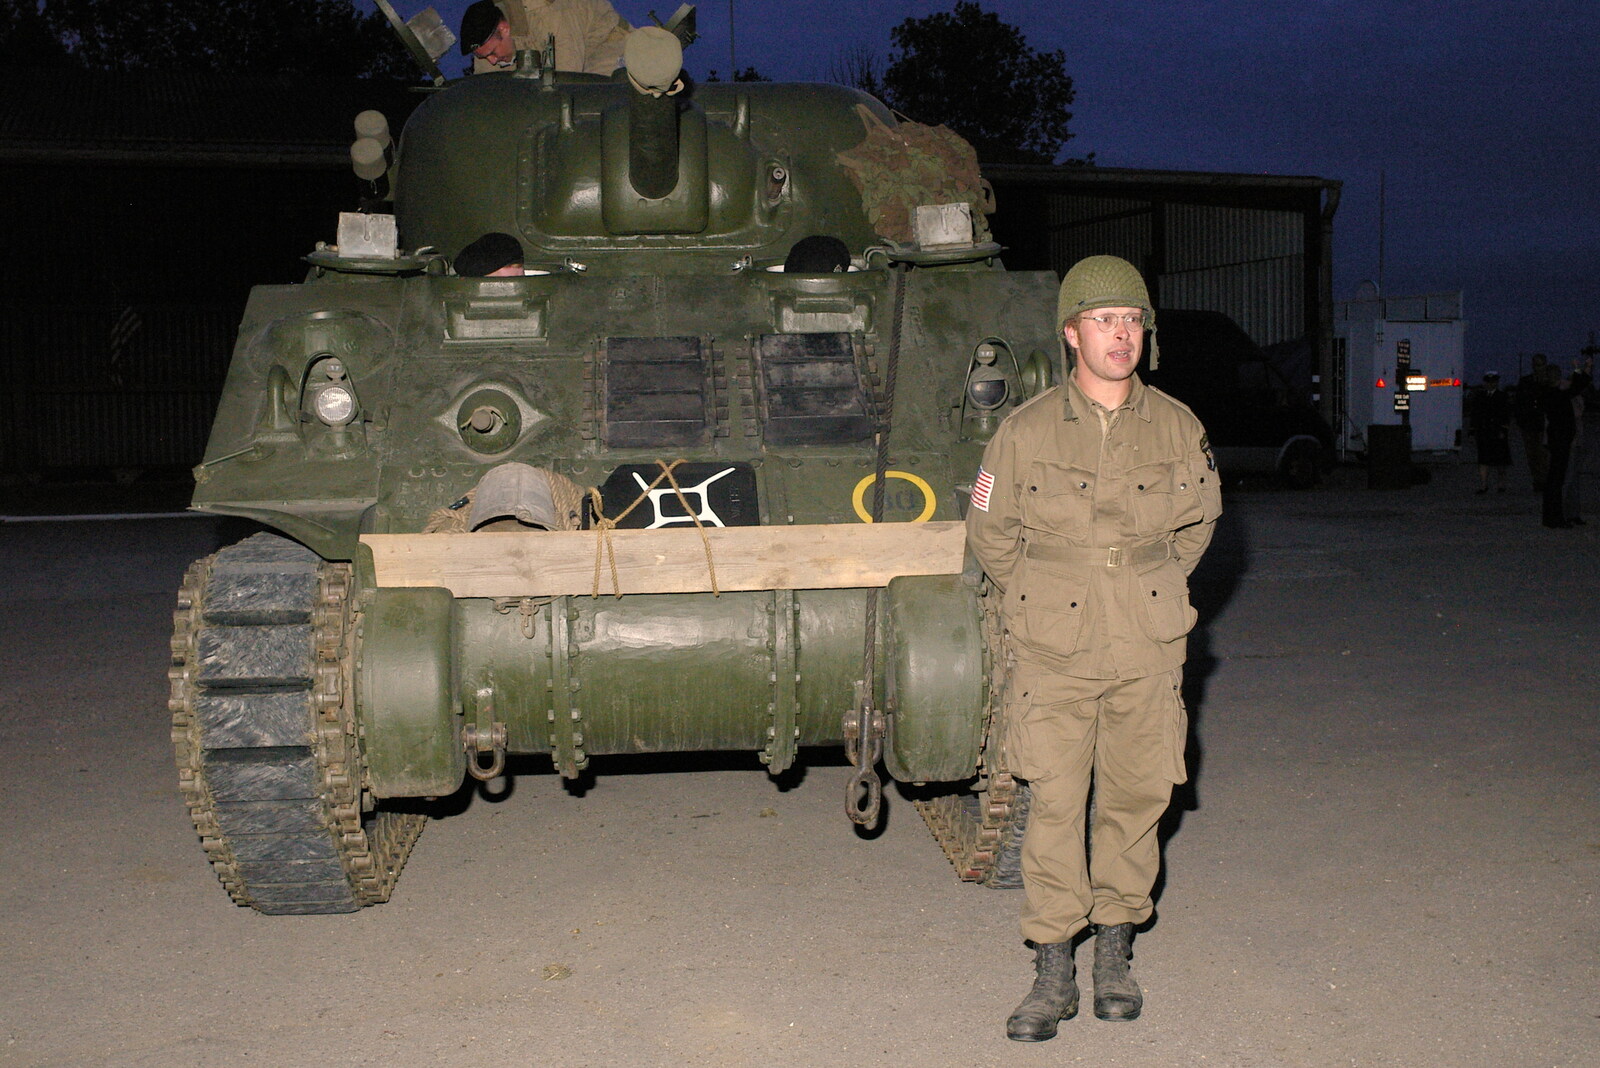 Marc stands in front of the tank from A 1940s VE Dance At Debach Airfield, Debach, Suffolk - 11th June 2005